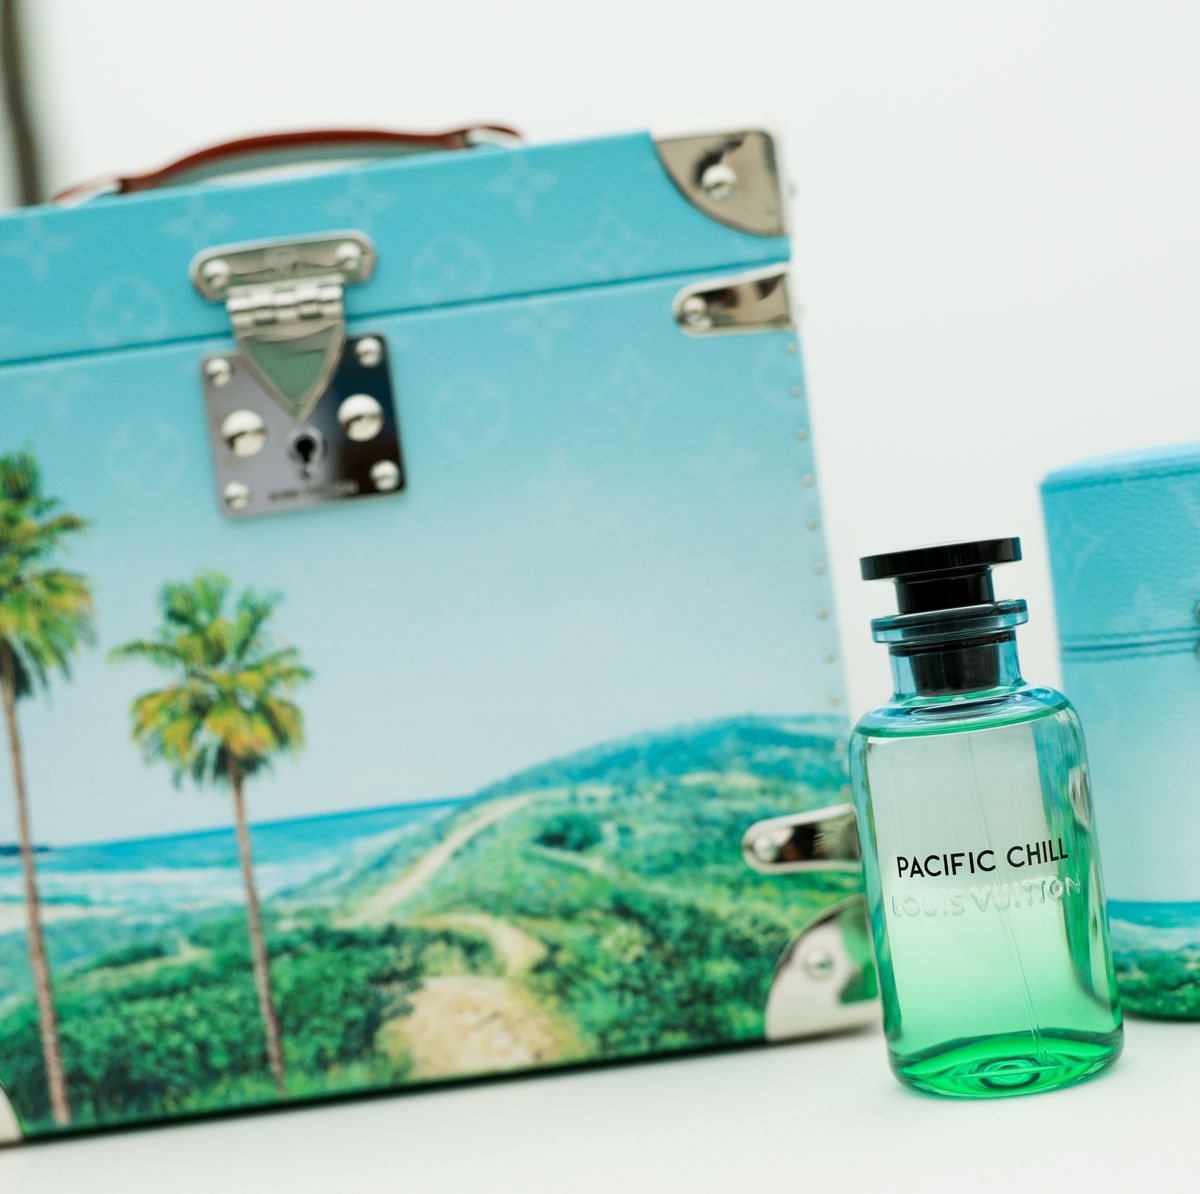 LOUIS VUITTON PACIFIC CHILL (FRAGRANCE REVIEW!) 